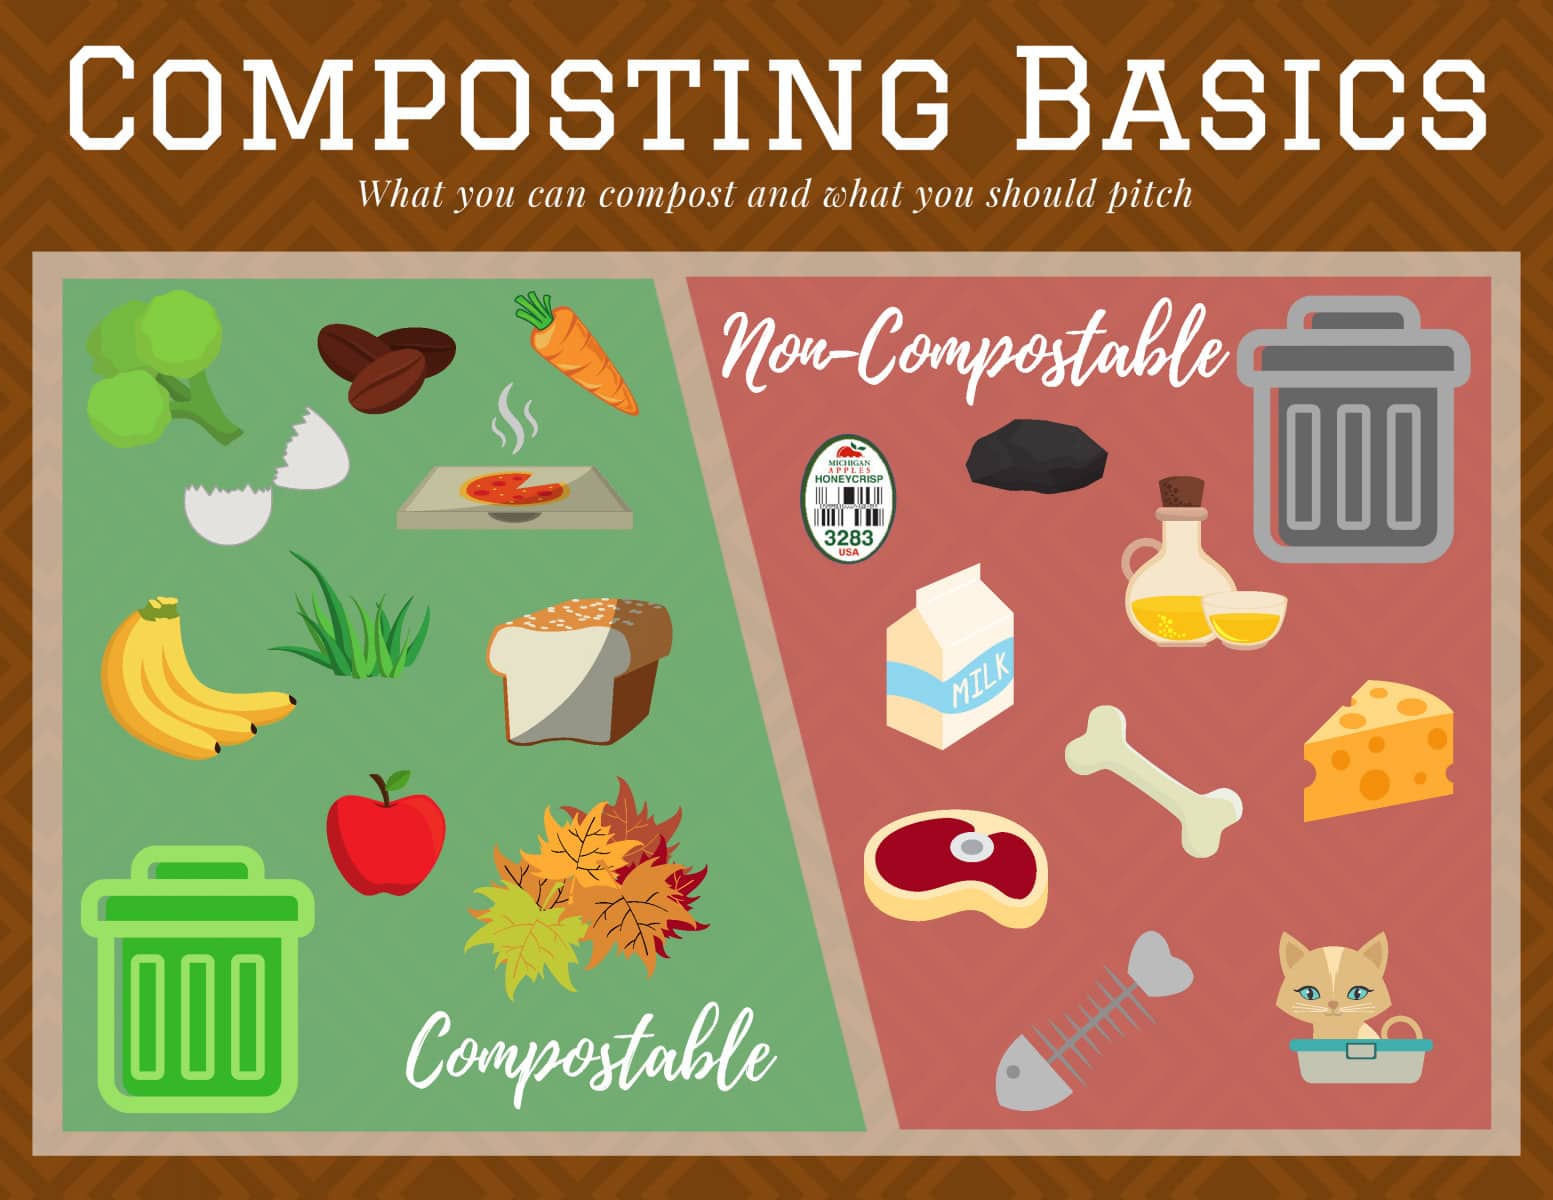 A composting basics diagram is shown. On one half of the diagram is compostable material such as leaves, apples, bread, coffee, egg shells etc. On the other side of the diagram is the non-compostable material such as bones, meat, dairy, stickers, coal, cat or dog waste etc. 